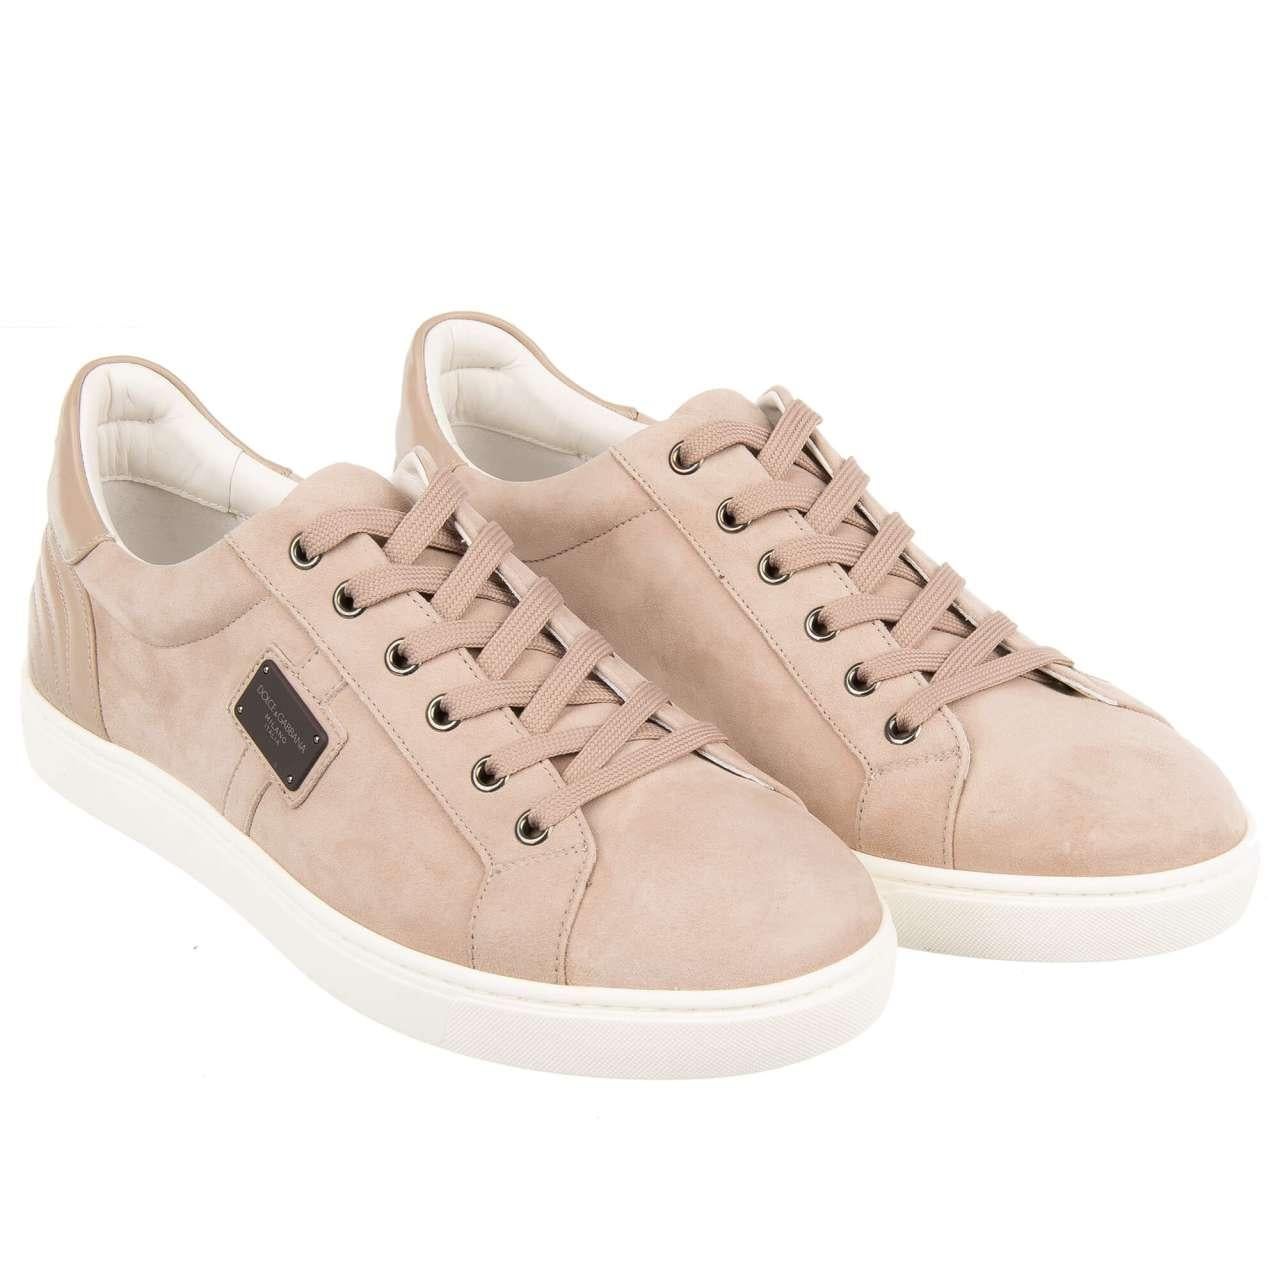 Men's D&G Low-Top Suede Sneaker LONDON with DG Logo Plate Beige White 41 UK 7 US 8 For Sale